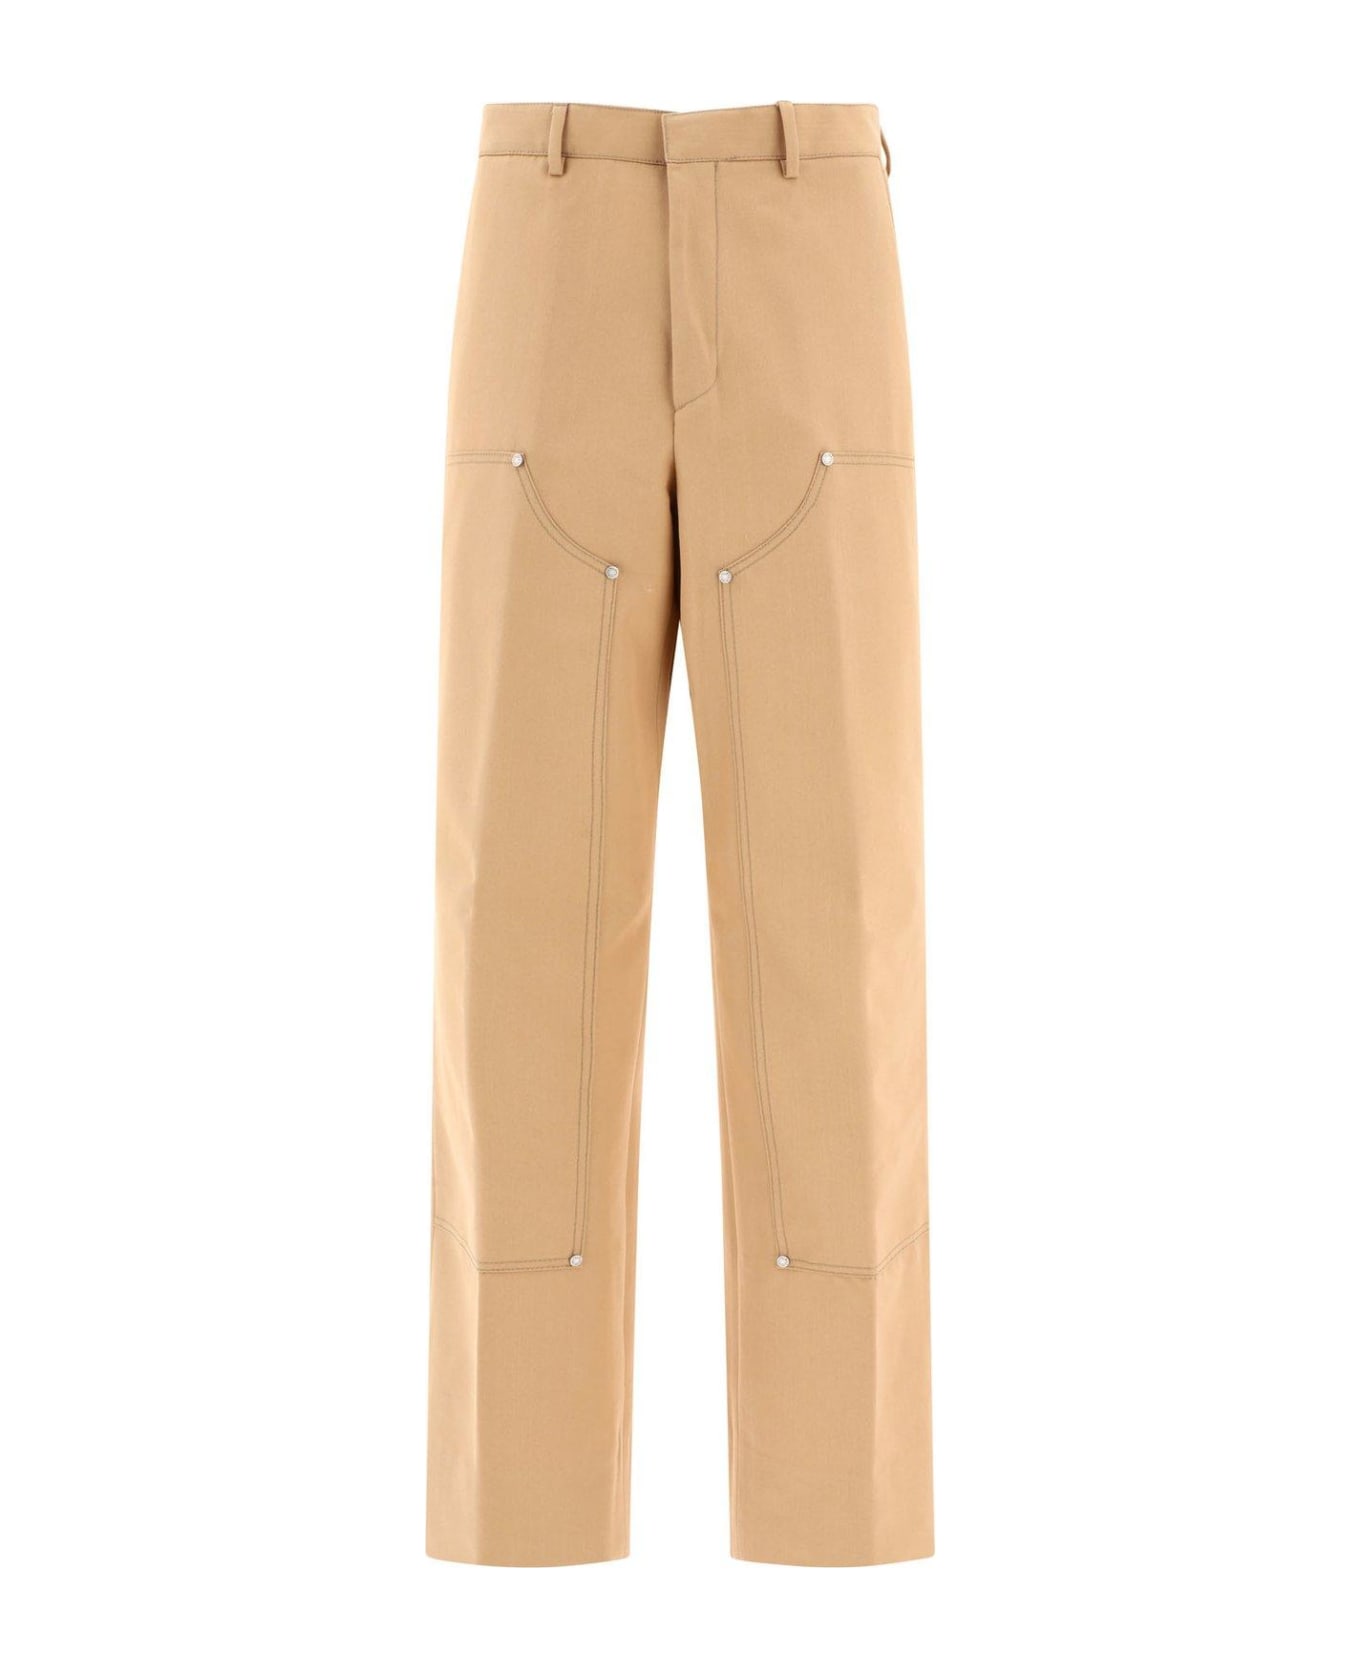 Palm Angels Pa Embroidered Workwear Trousers - Beige ボトムス